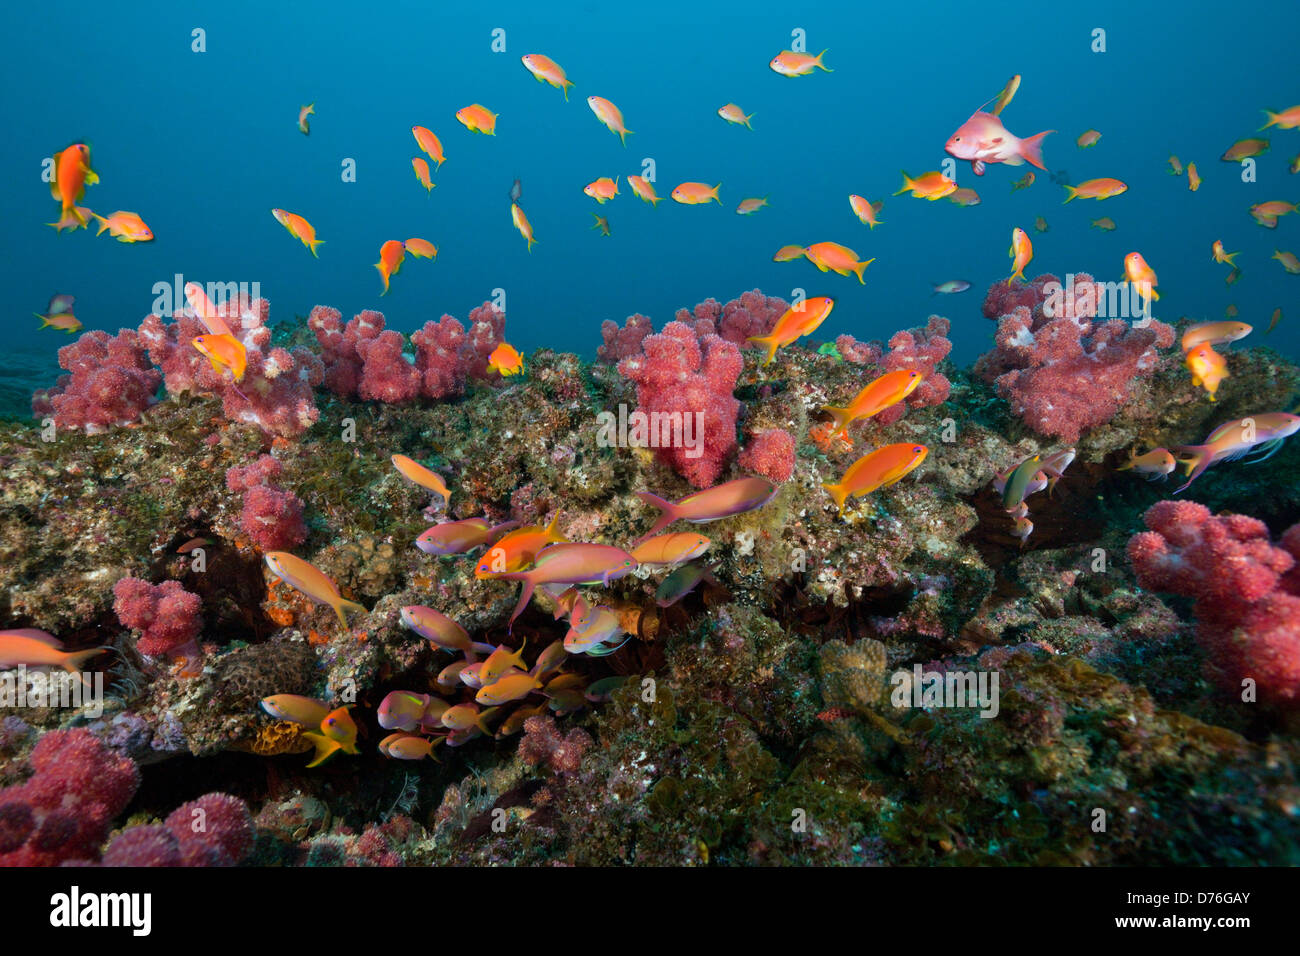 Lyretail Anthias over Coral Reef, Aliwal Shoal, Indian Ocean, South Africa Stock Photo